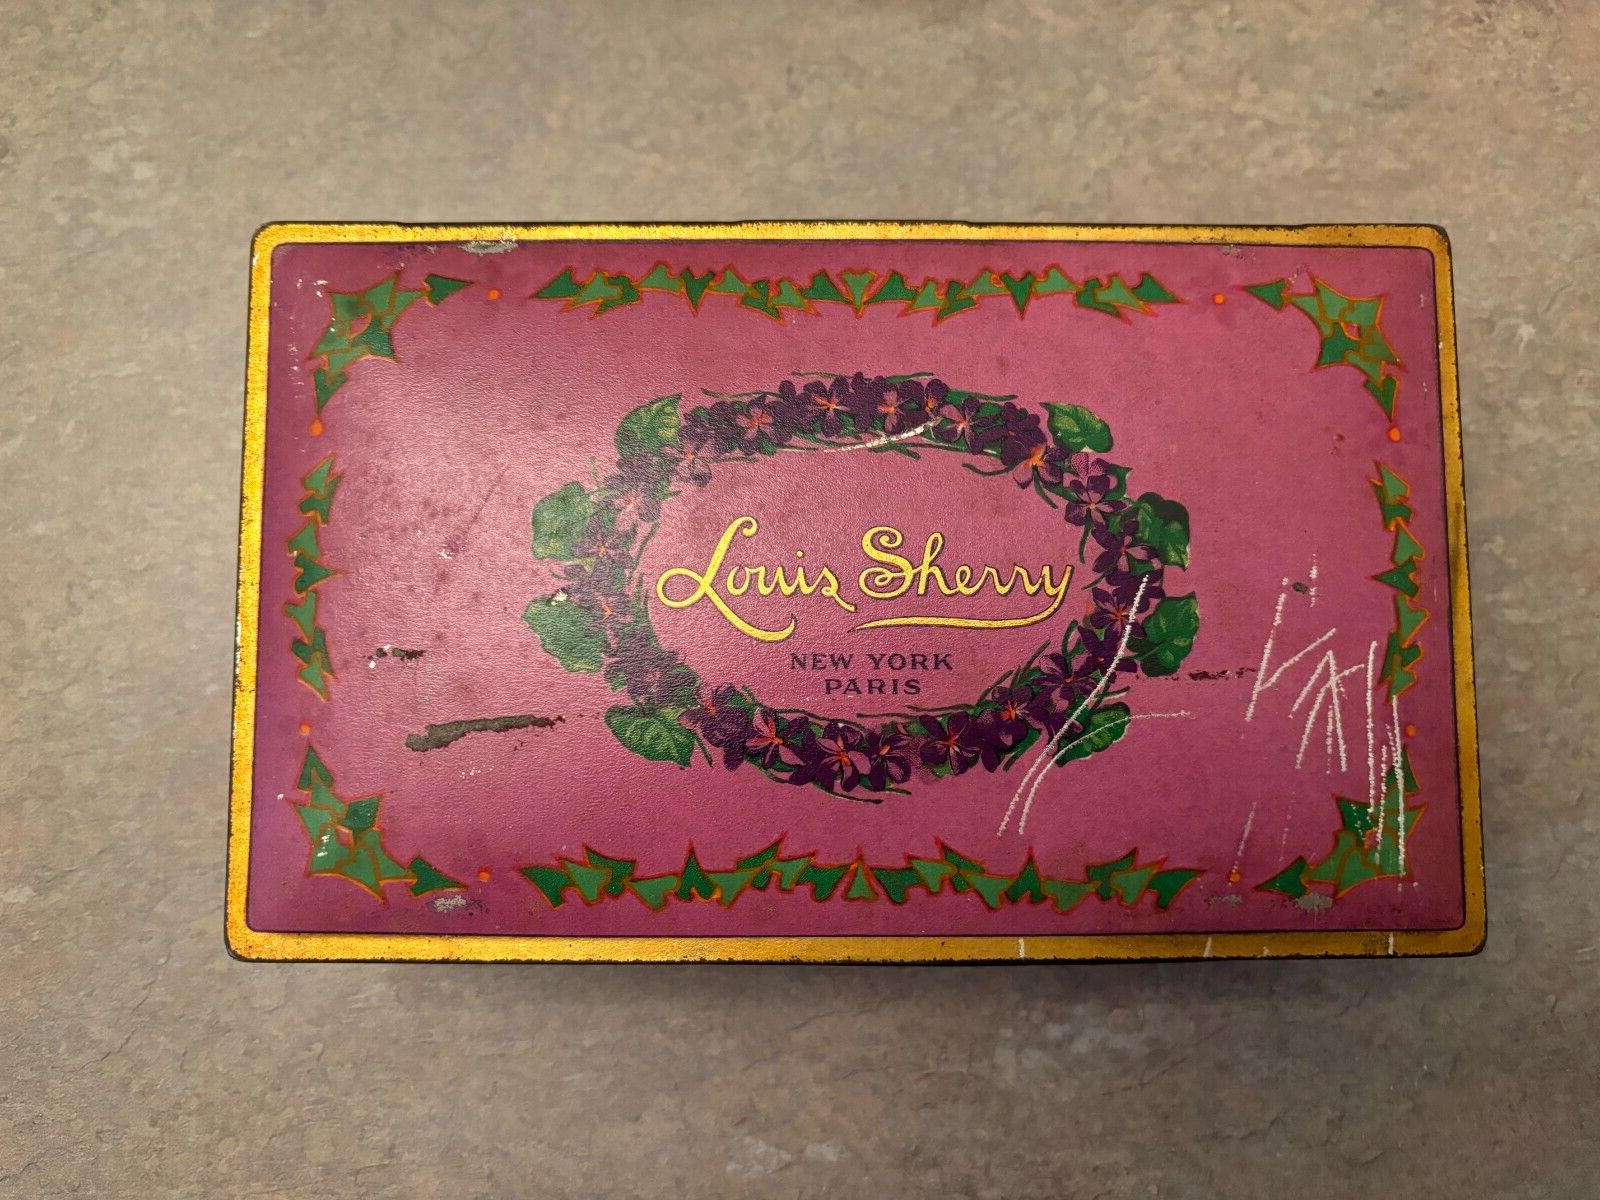 Louis Sherry Vintage Chocolates Box - Pink with Violets.